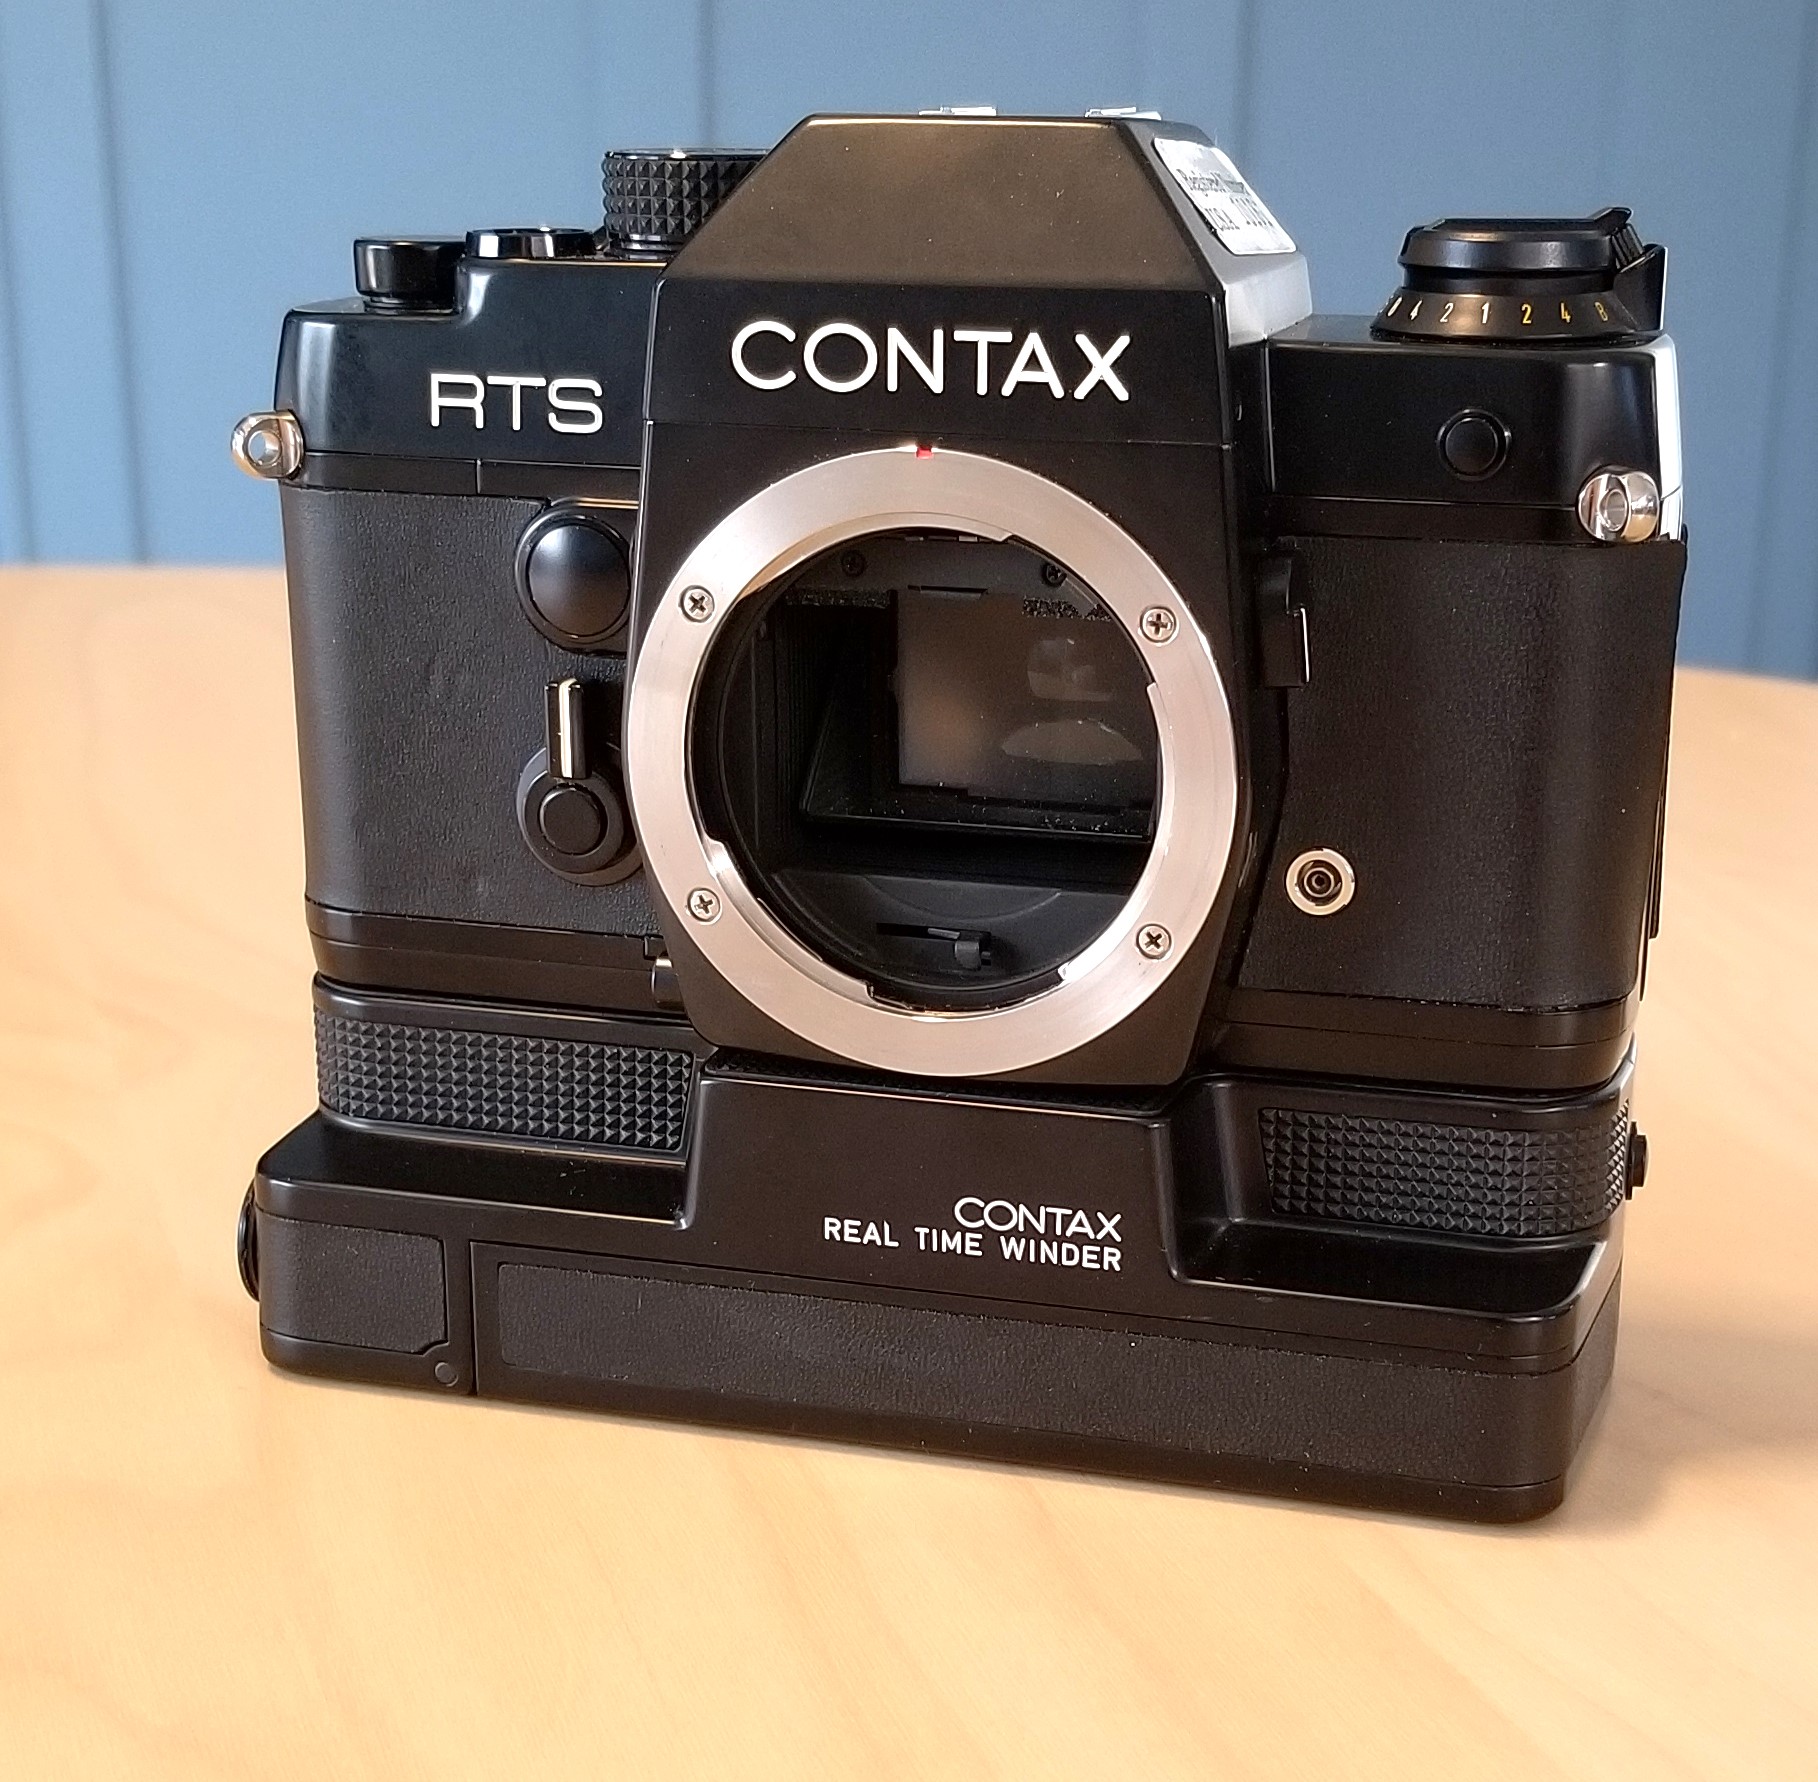 Contax RTS | Chasing Classic Cameras with Chris